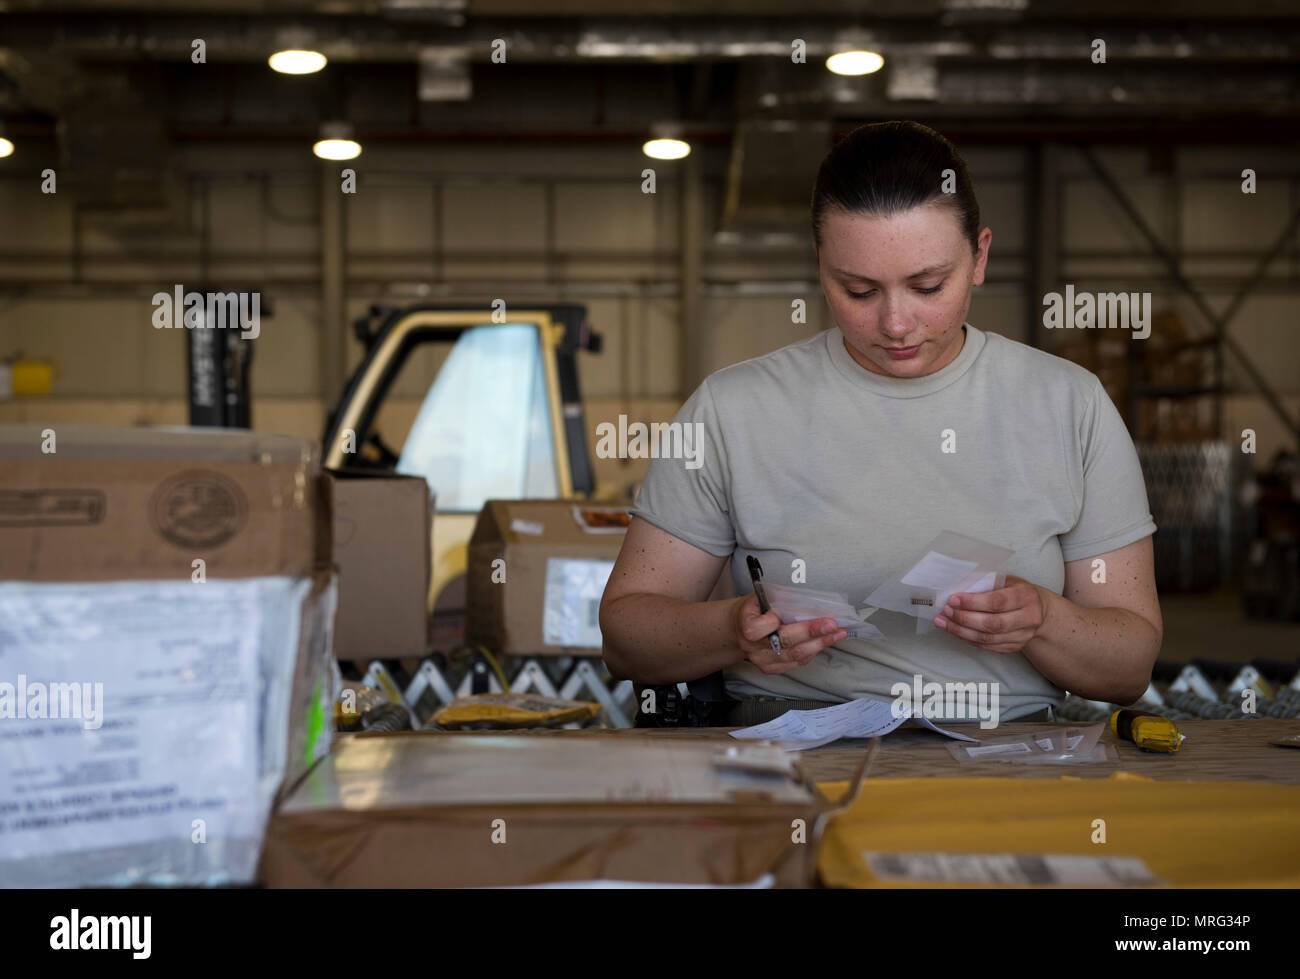 Senior Airman Cynthia Henke, 455th Expeditionary Logistics Readiness Squadron traffic management office, verifies the quantity of a product at Bagram Airfield, Afghanistan, June 13, 2017. When receiving an order, 455th ELRS TMO Airmen must verify the product, quantity, quality and recipient. (U.S. Air Force photo by Staff Sgt. Benjamin Gonsier) Stock Photo